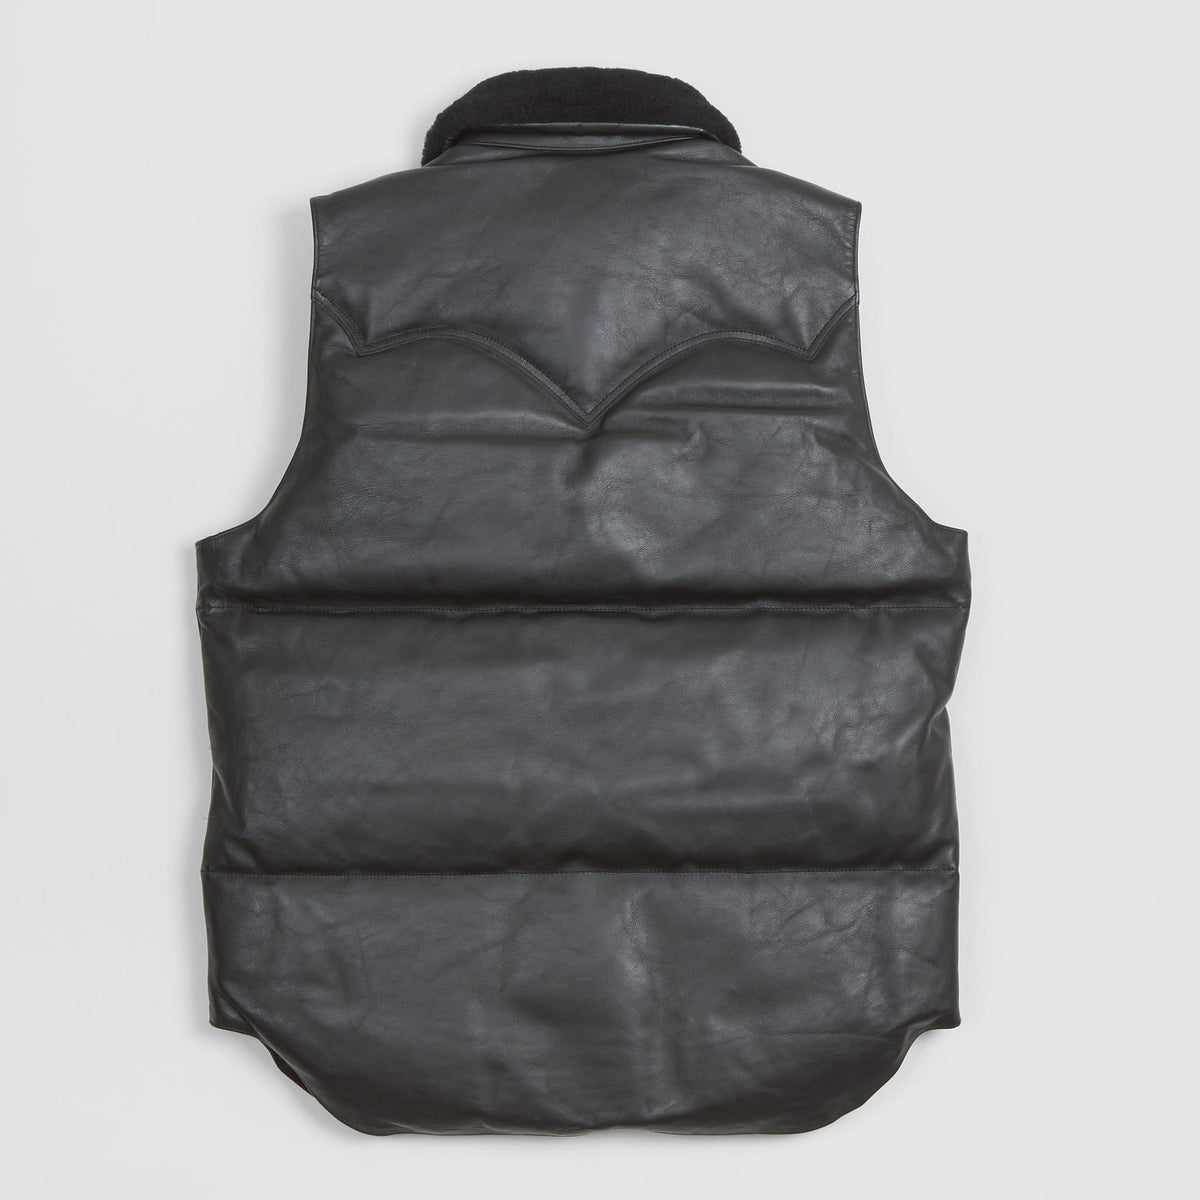 Rocky Mountain Featherbed Black Leather Down Vest - DeeCee style